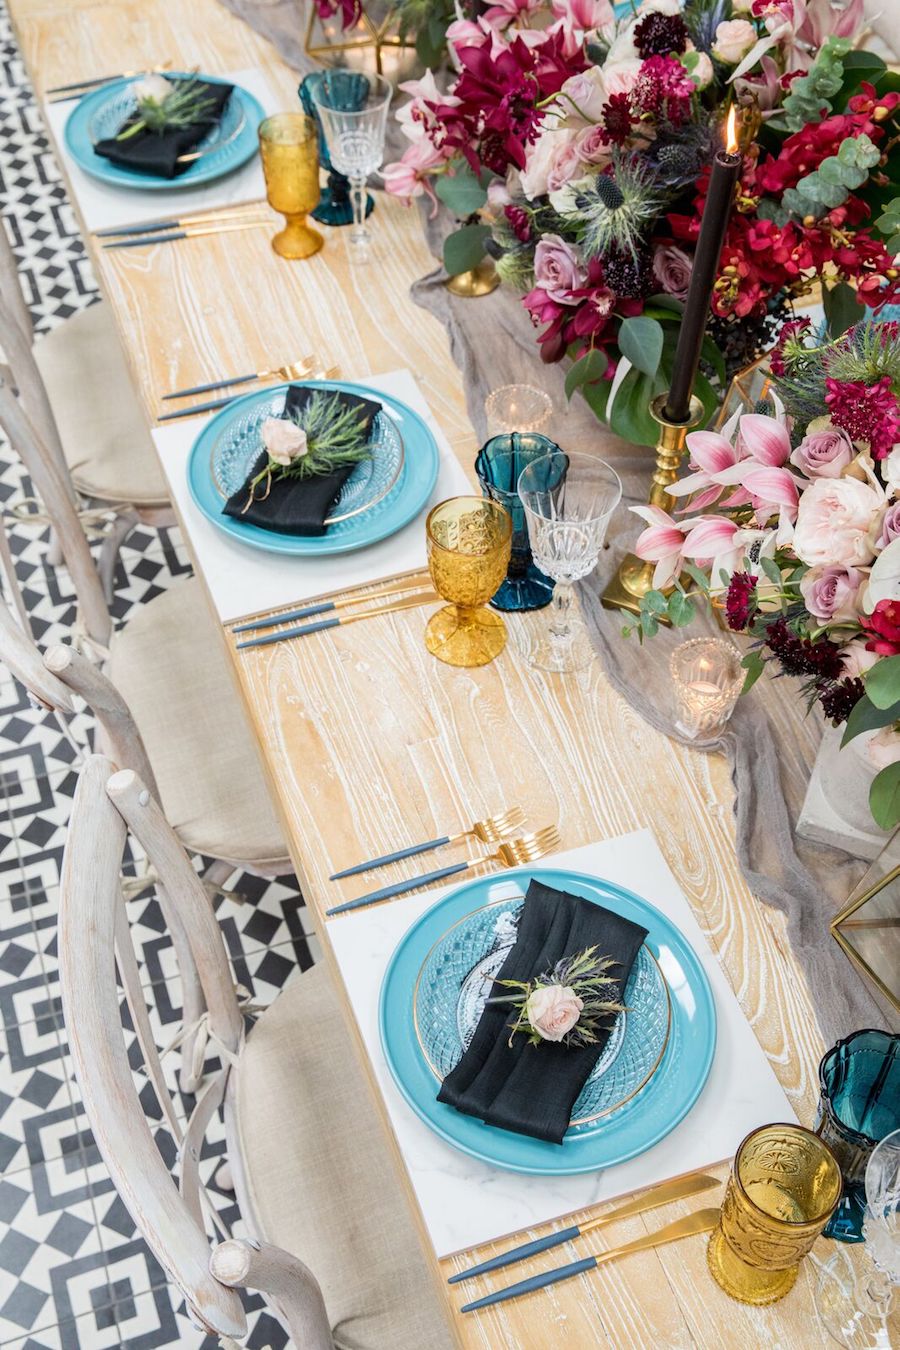 The tablescape features blue plates, blue and gold glasses, black candles in gold candle holders and various lush florals